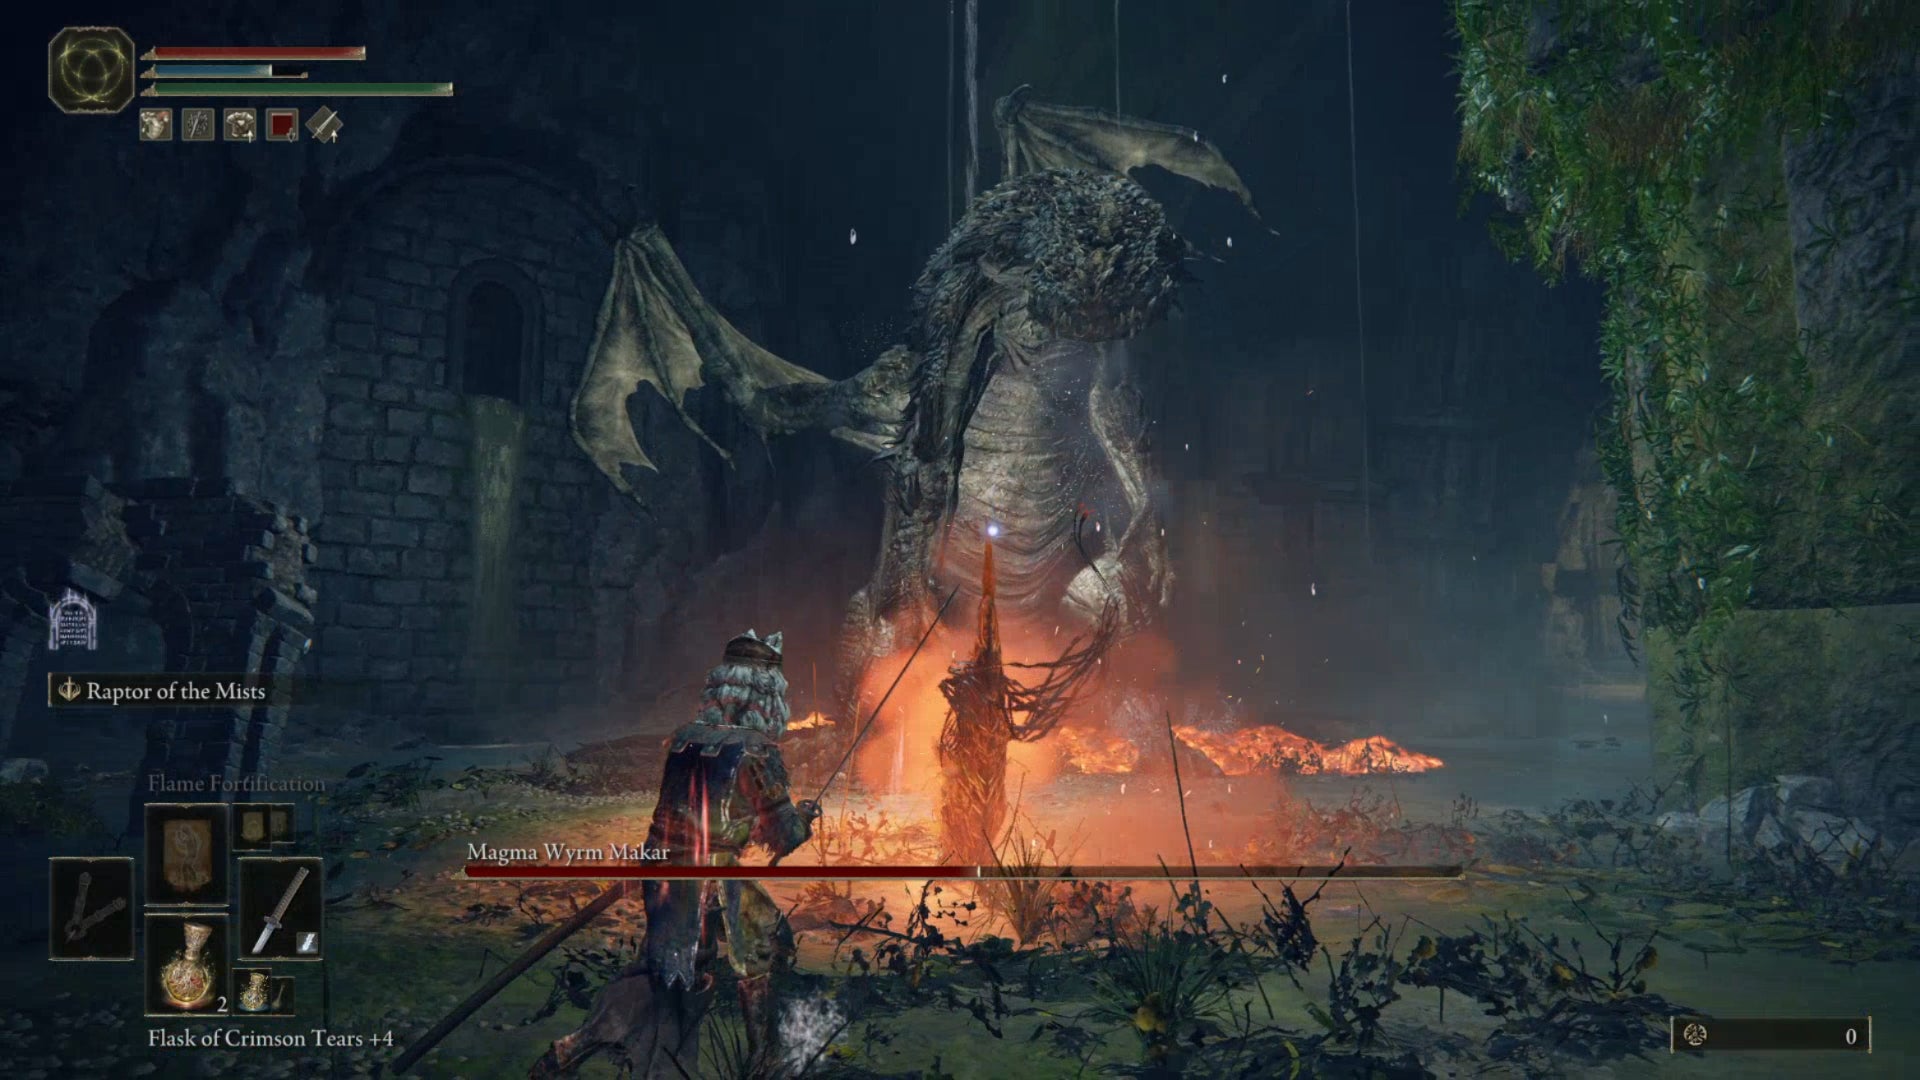 Elden Ring: the player fights the boss Magma Wyrm Makar.